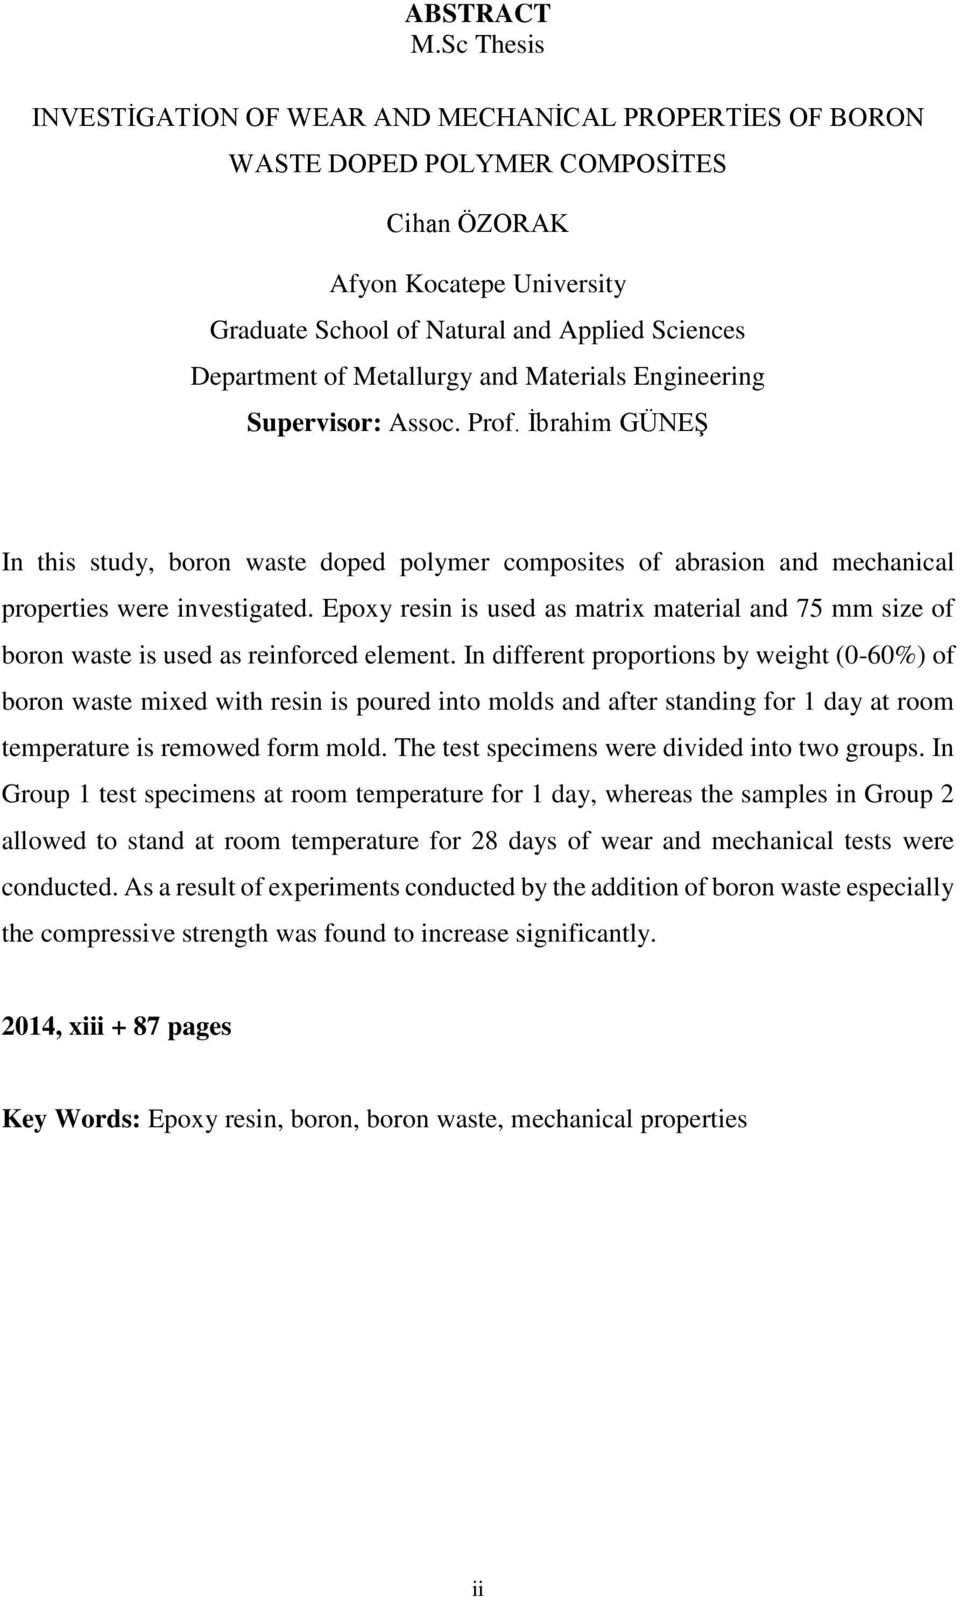 Metallurgy and Materials Engineering Supervisor: Assoc. Prof. İbrahim GÜNEŞ In this study, boron waste doped polymer composites of abrasion and mechanical properties were investigated.